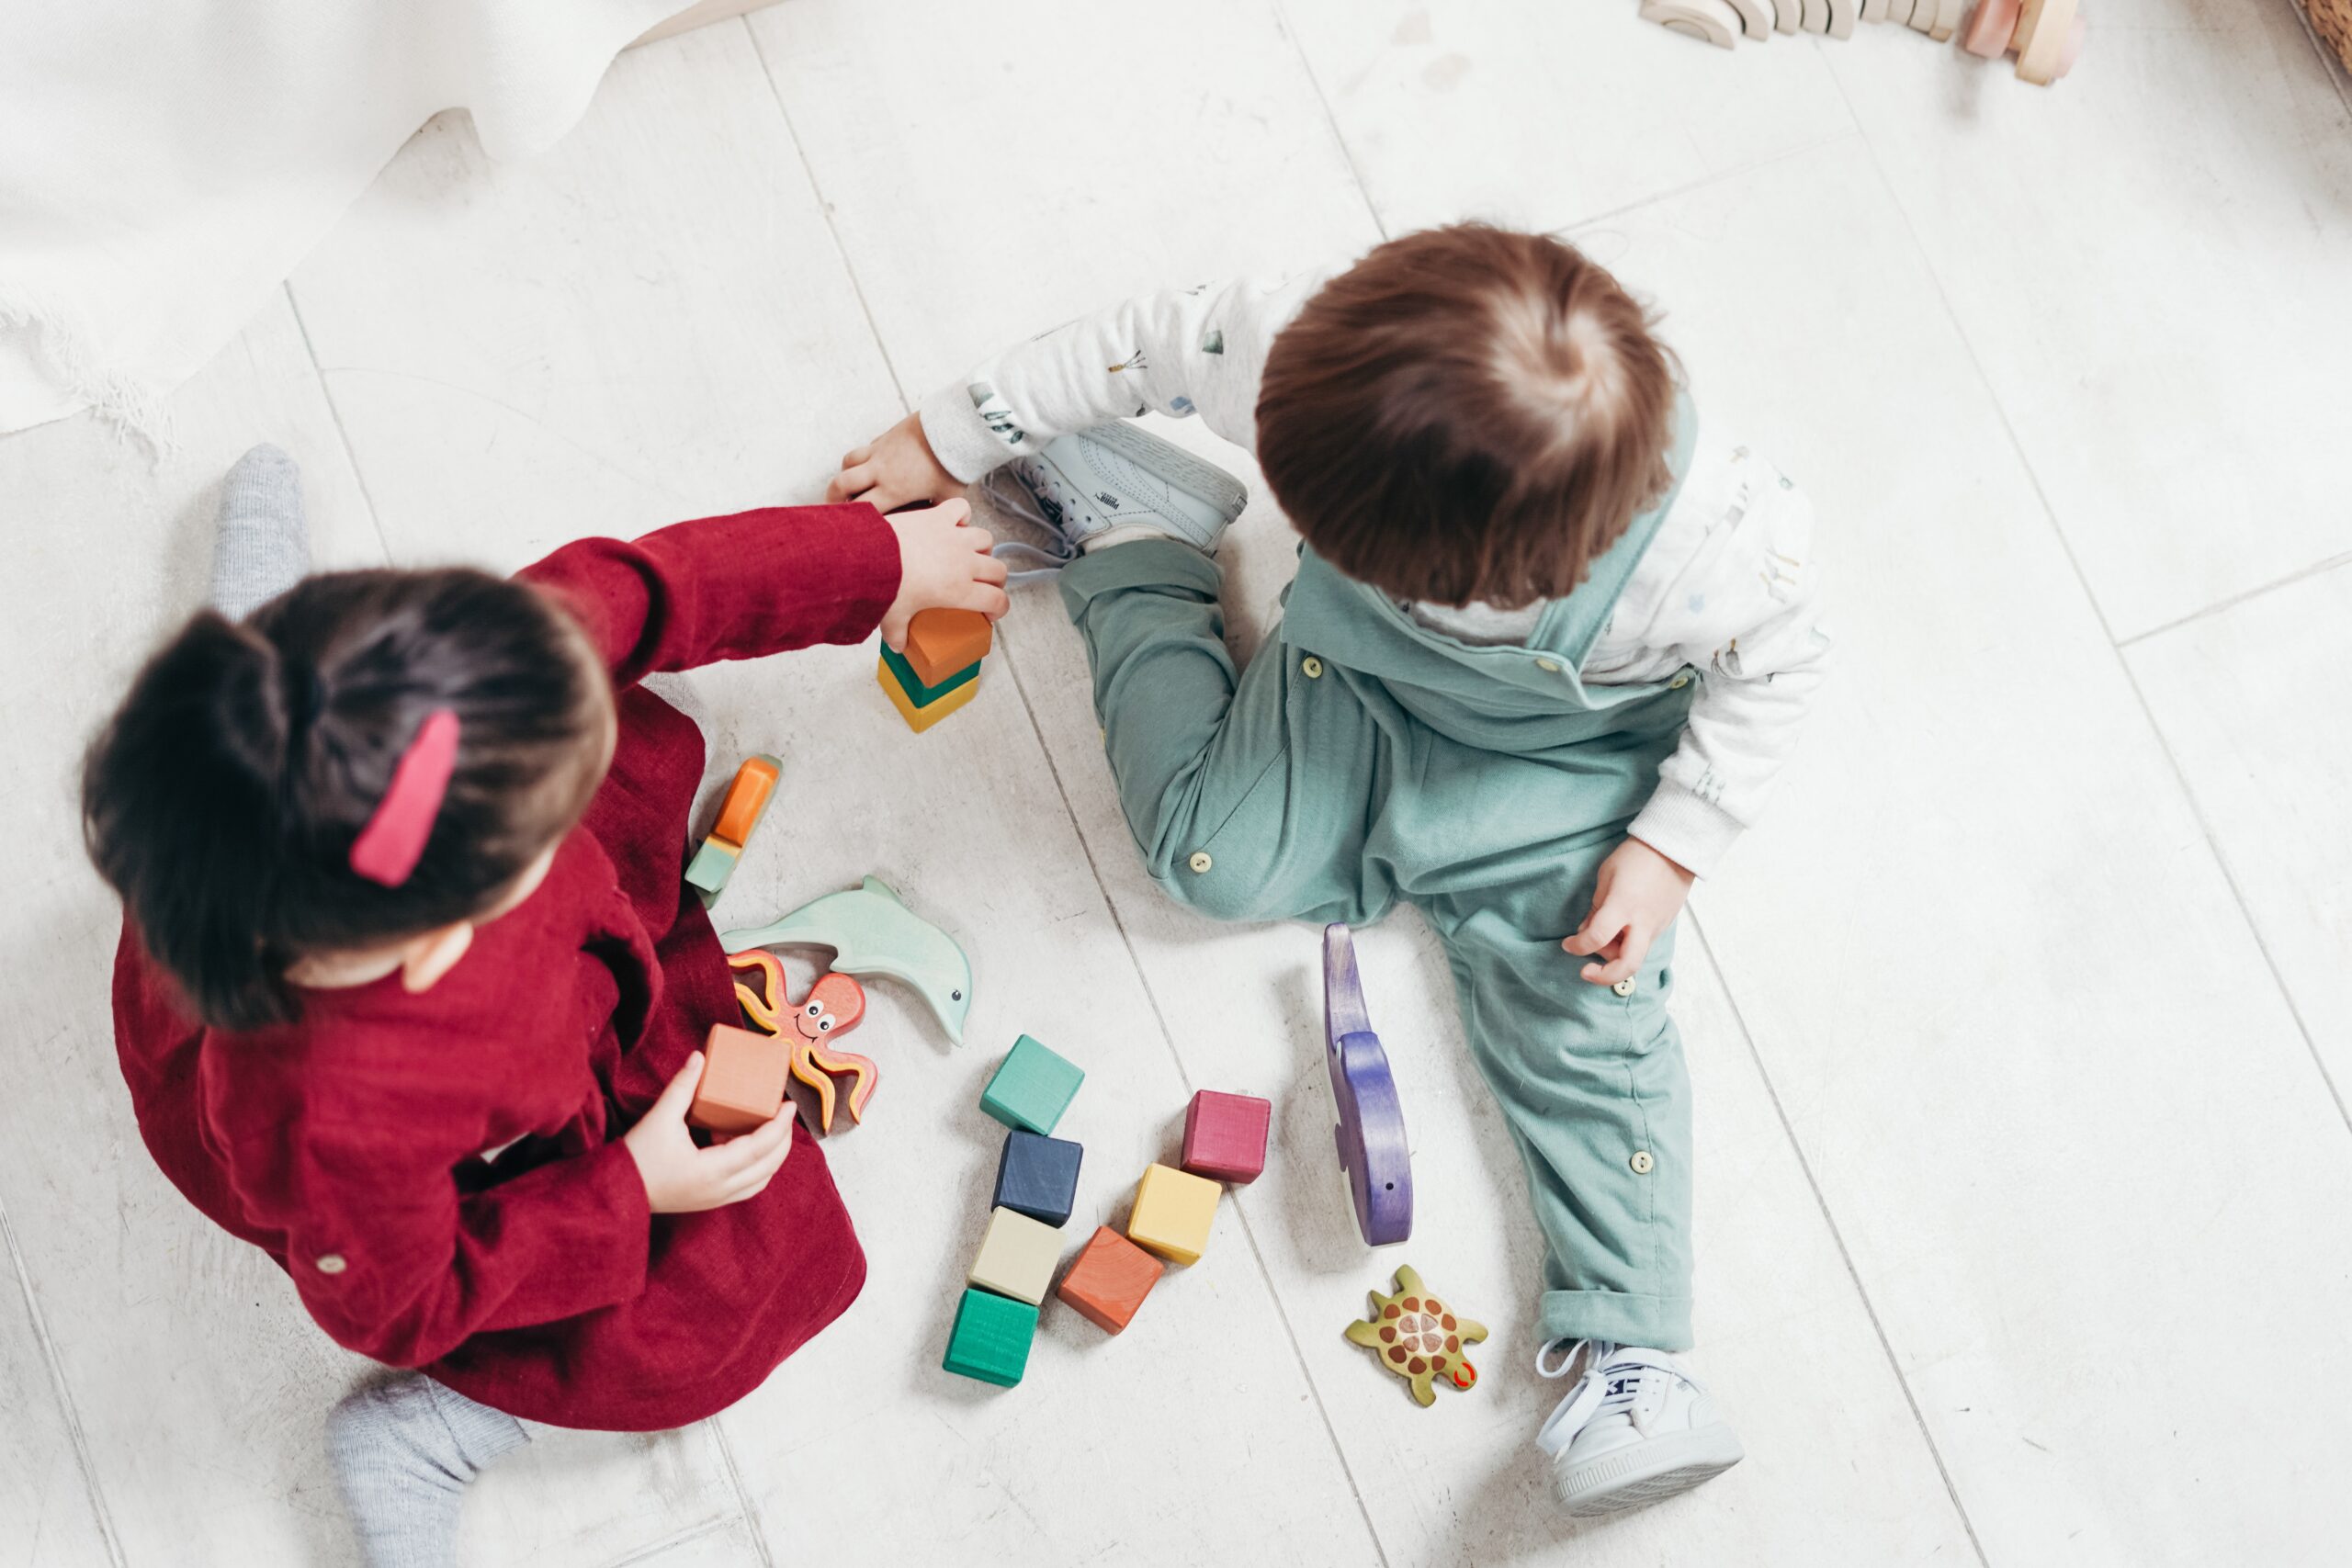 Two young children playing with colourful wooden blocks